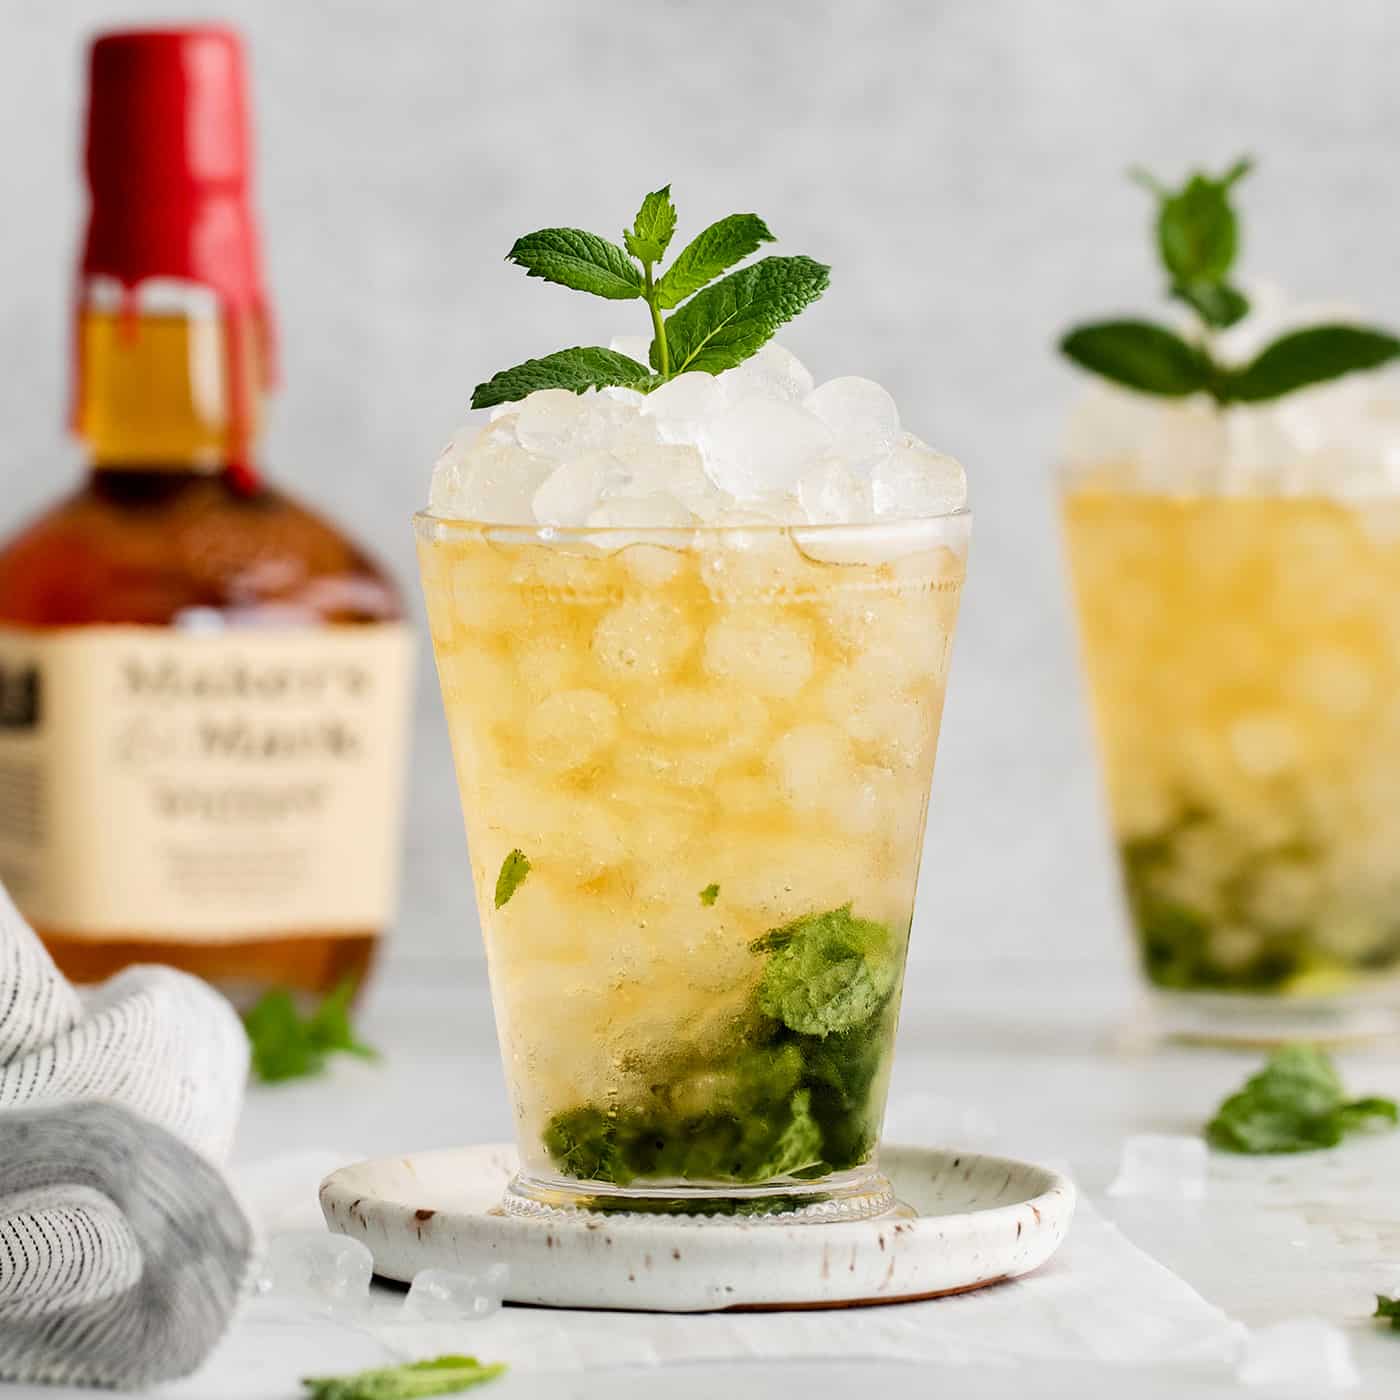 Two mint julep cocktails